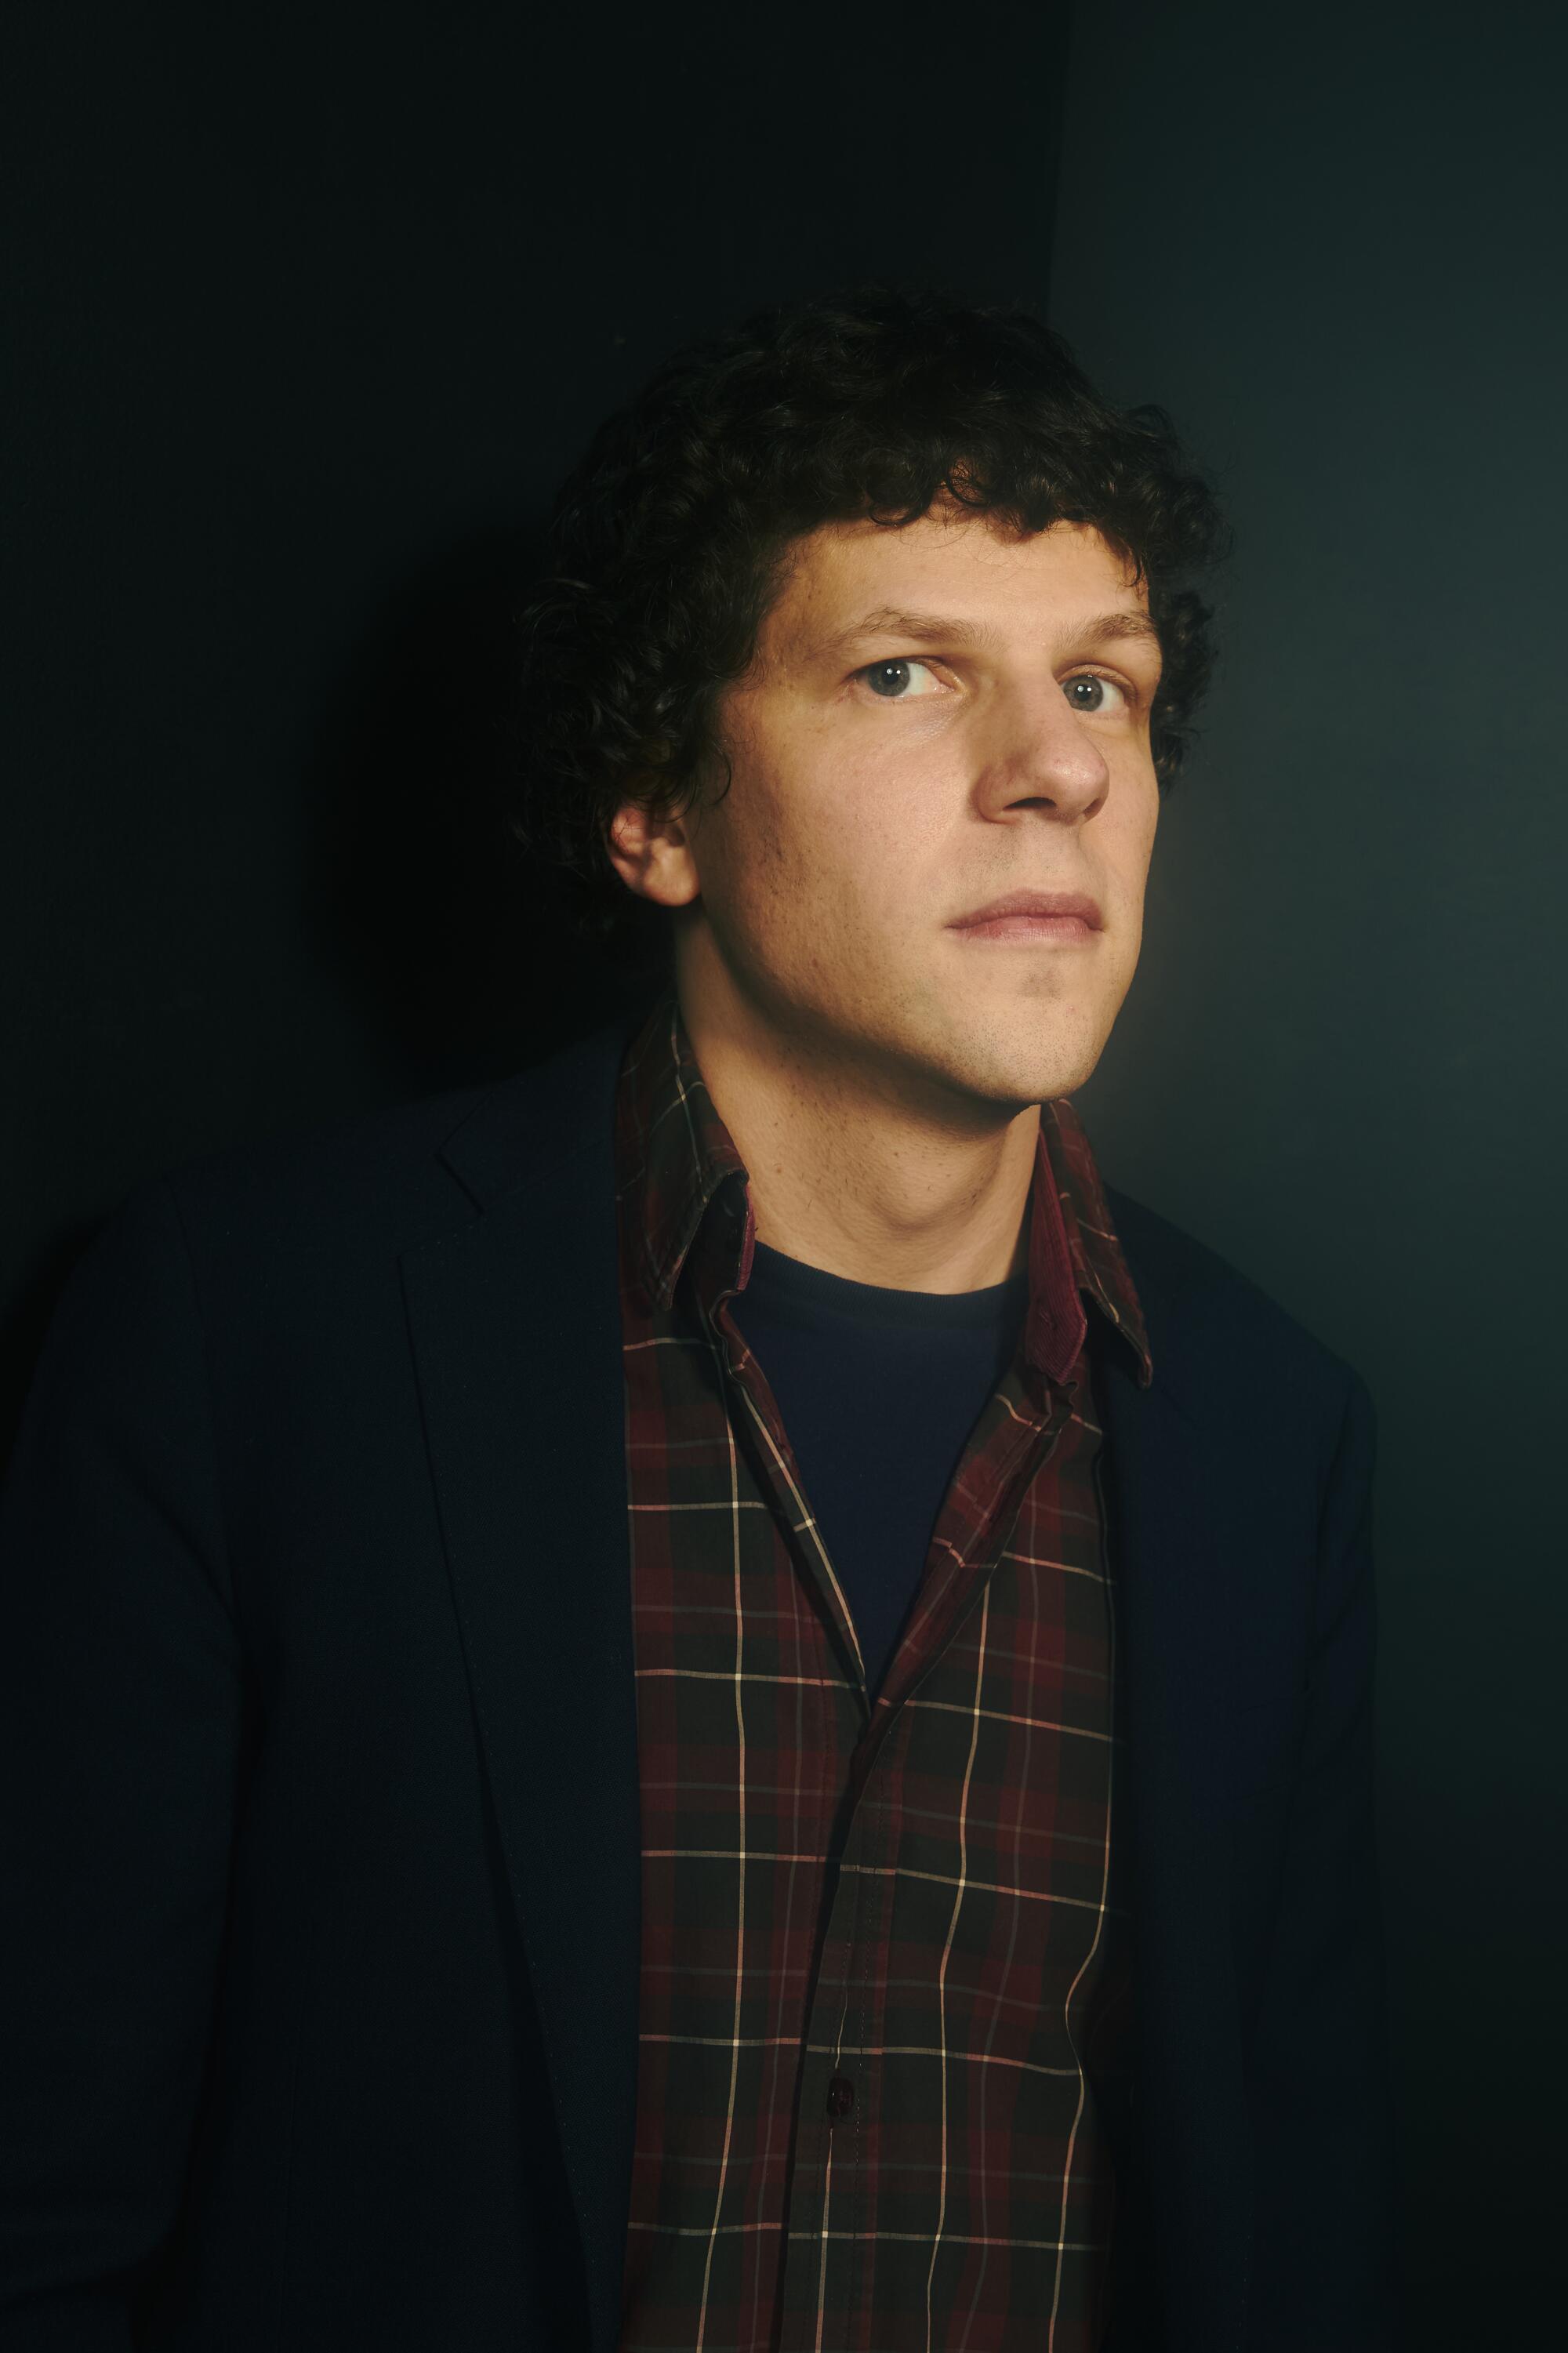 =Jesse Eisenberg of "A Real Pain" =